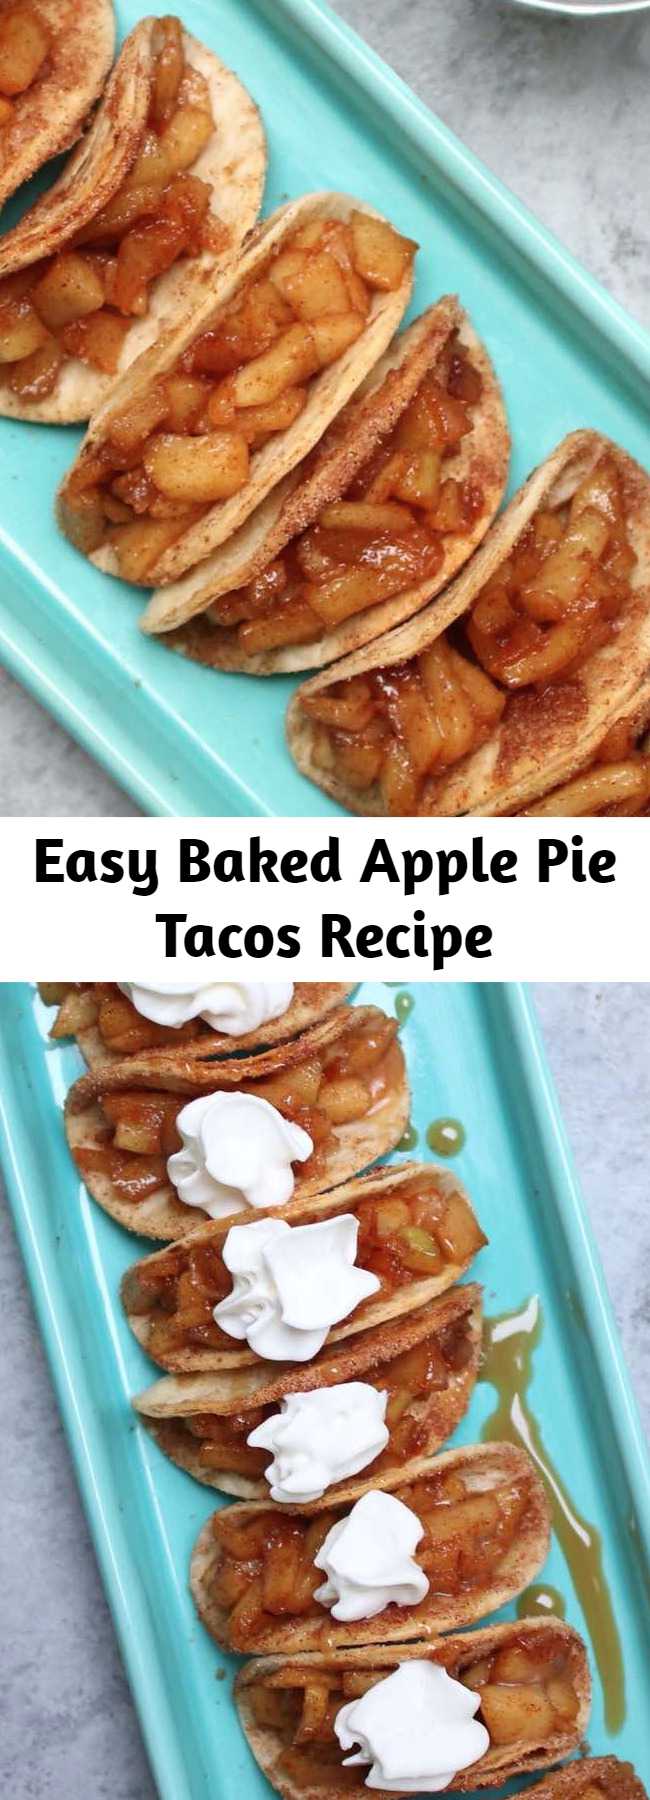 Easy Baked Apple Pie Tacos Recipe - These easy Apple Pie Tacos have a delicious cinnamon sugary apple filling in a crispy and sweet taco, drizzled with caramel sauce, and then topped with whipped cream! It’s the perfect way to serve apple pie to a crowd! Quick and easy recipe! 